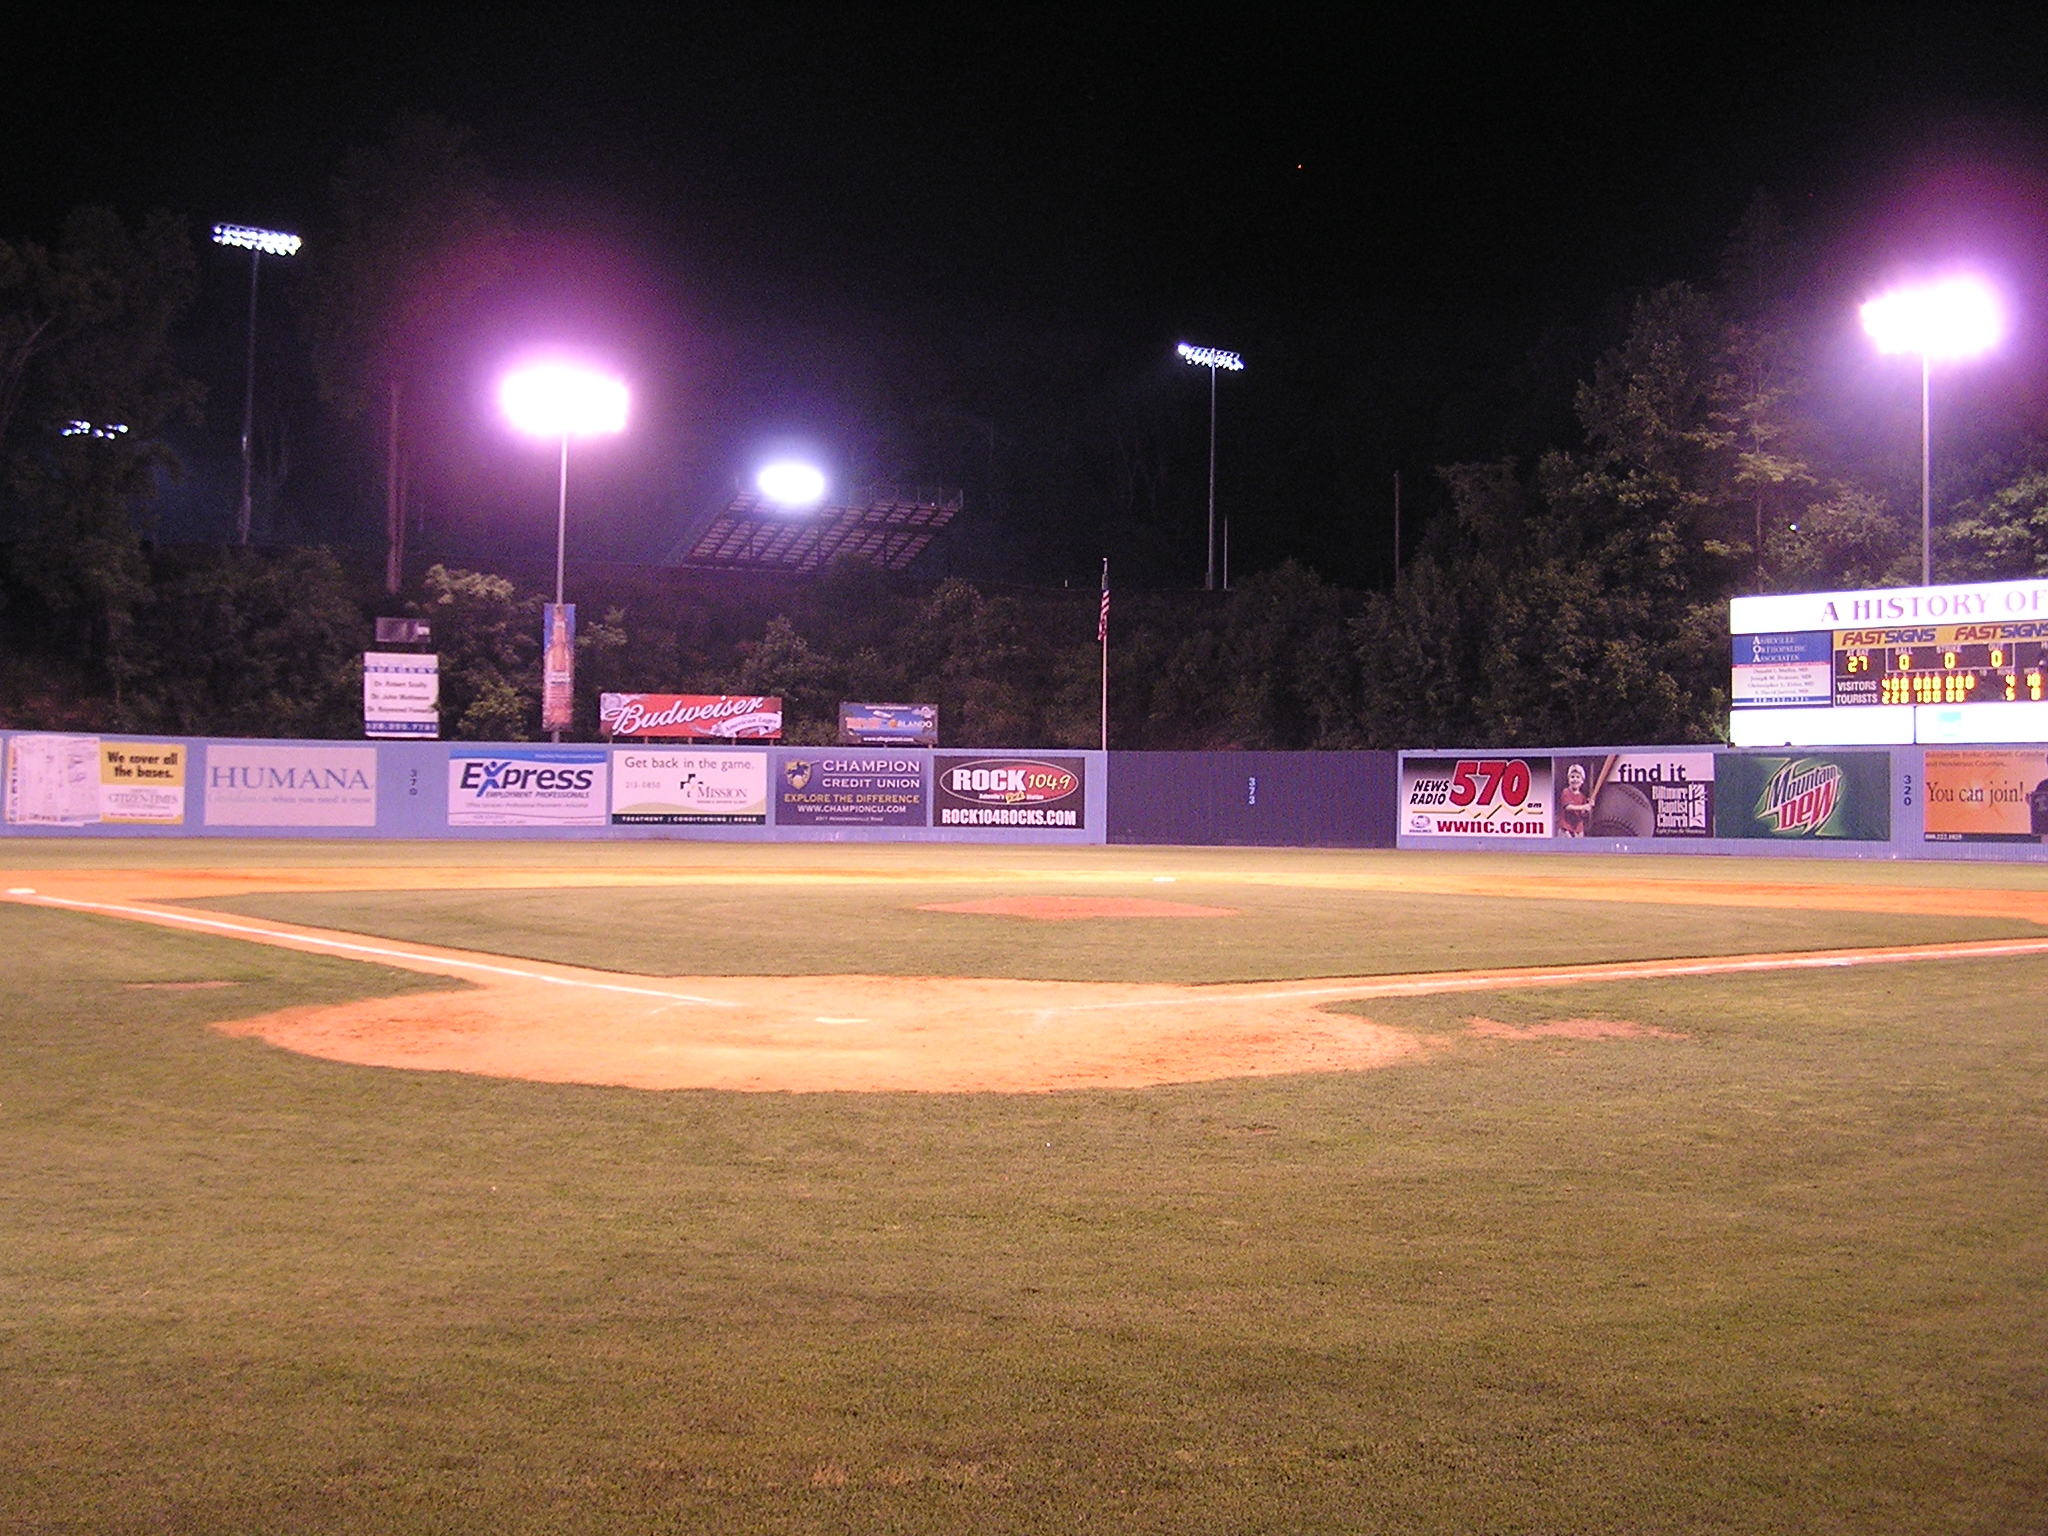 Game Over - McCormick Field, Asheville NC